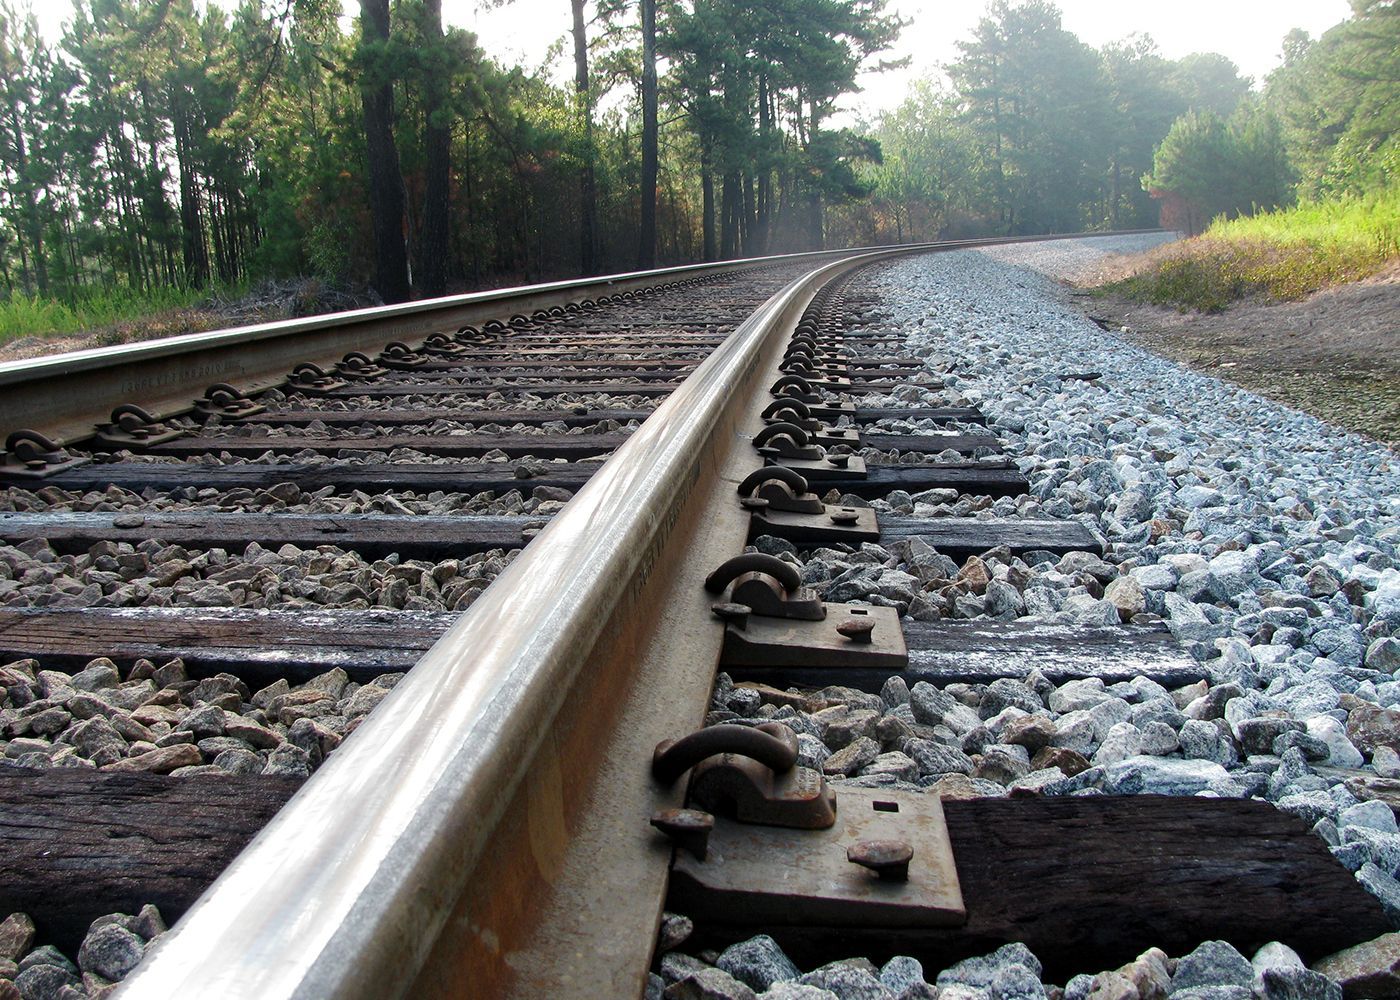 Victor baseplate combines the benefits of existing resilient rail fasteners with the durability of an American Railway Engineering and Maintenance of Way Association (AREMA) tie plate